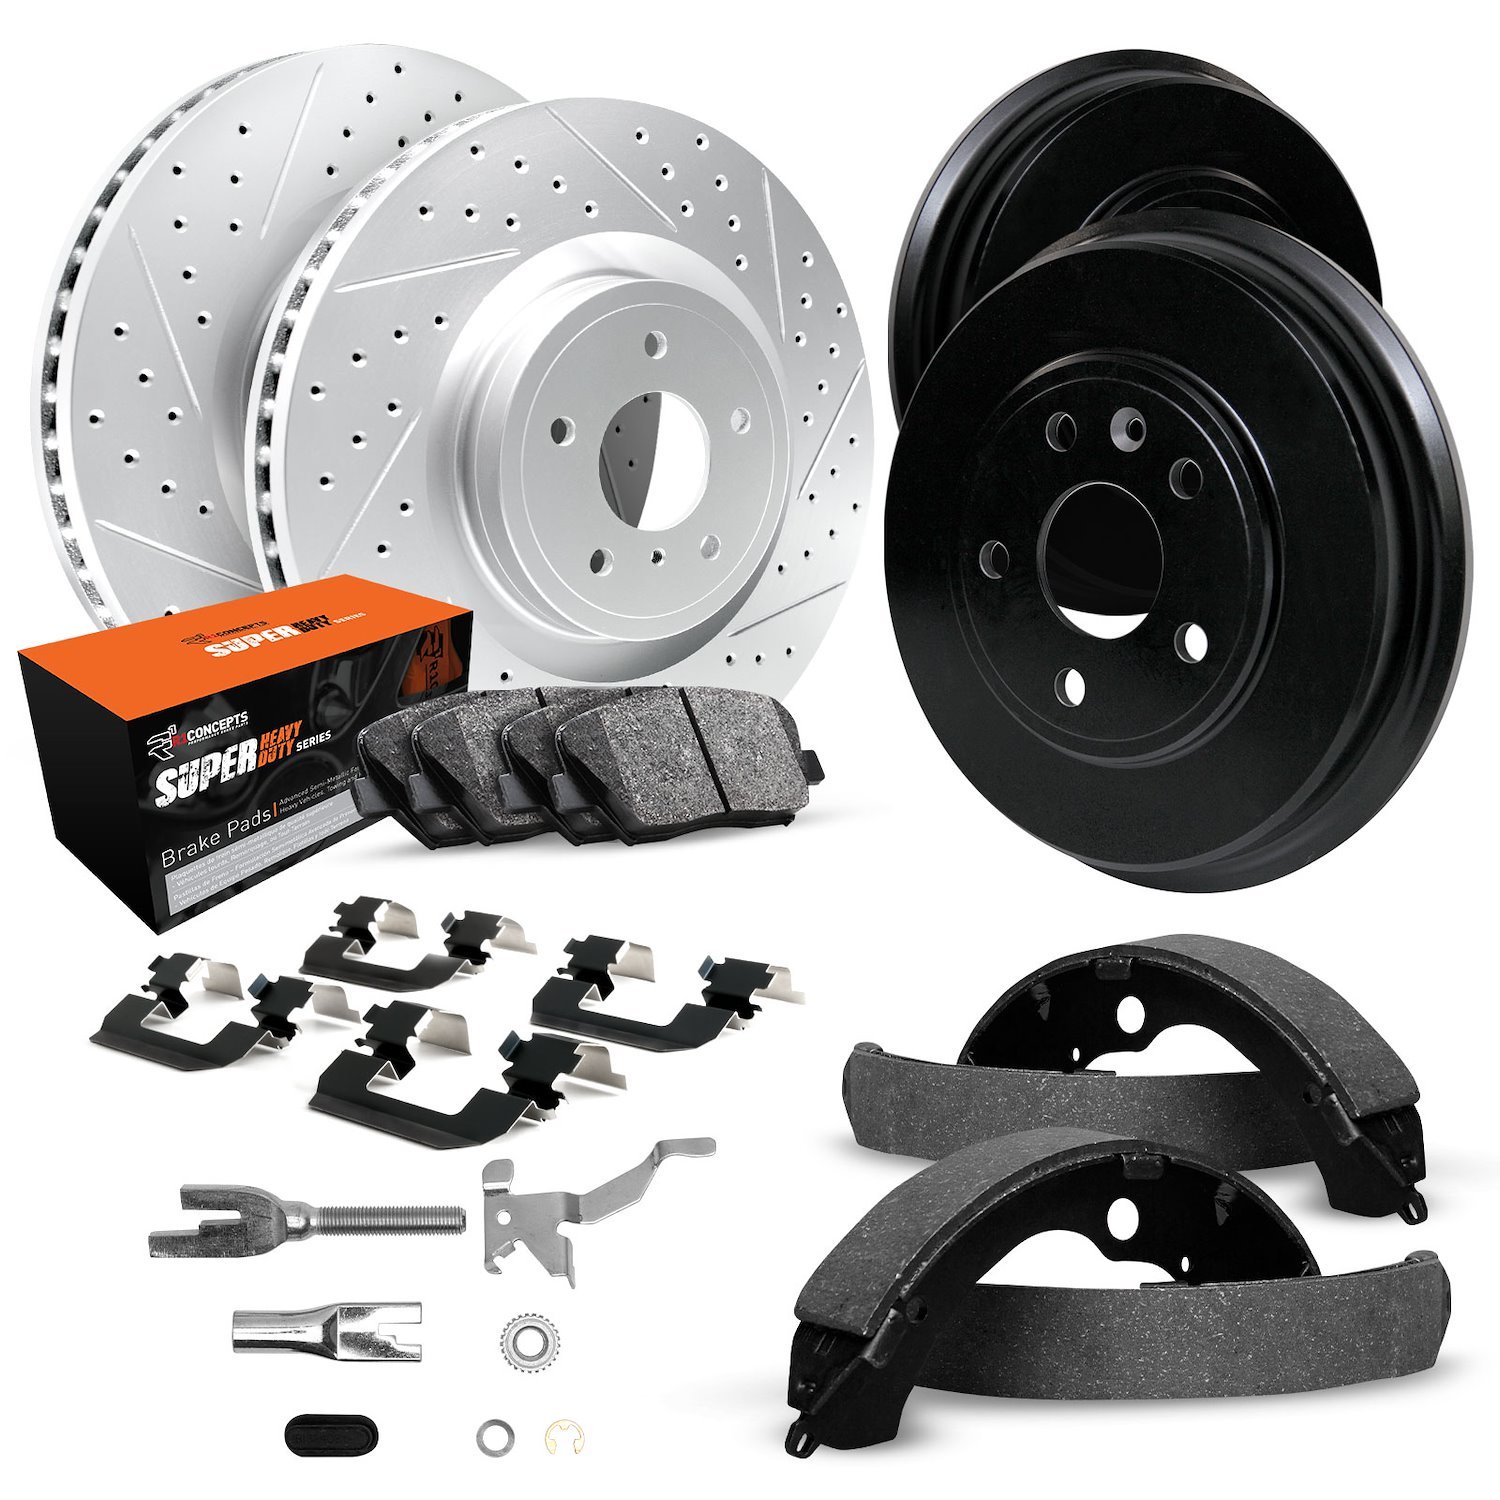 GEO-Carbon Drilled/Slotted Rotors/Drums w/Super-Duty Pads/Shoes/Hardware/Adjusters, 2000-2000 Mopar, Position: Front/Rear